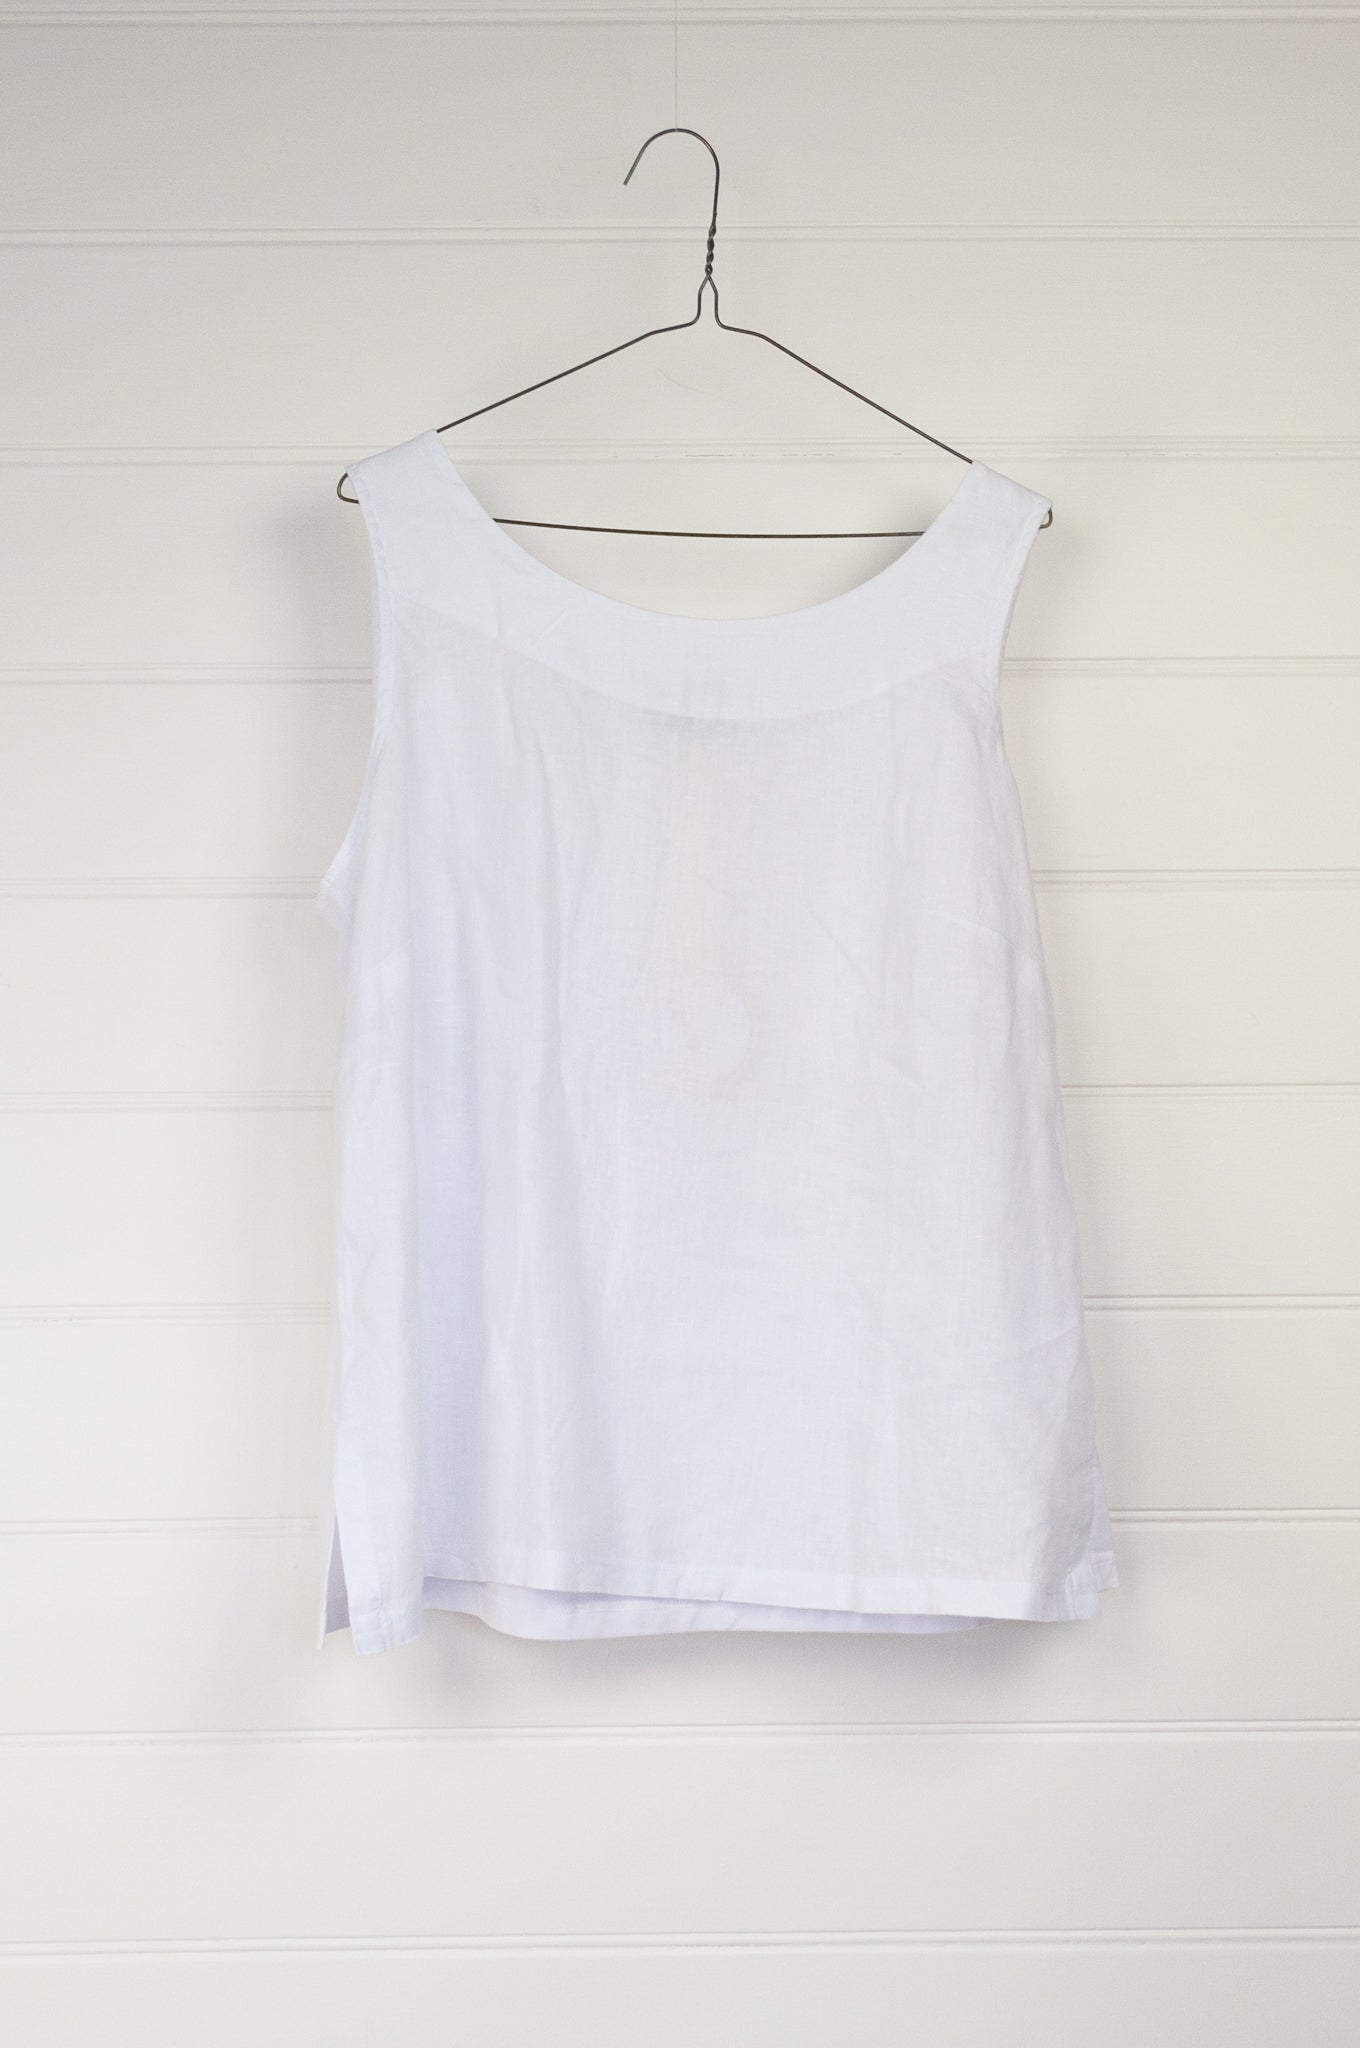 Valia Eva singlet in white linen front and cotton knit back.